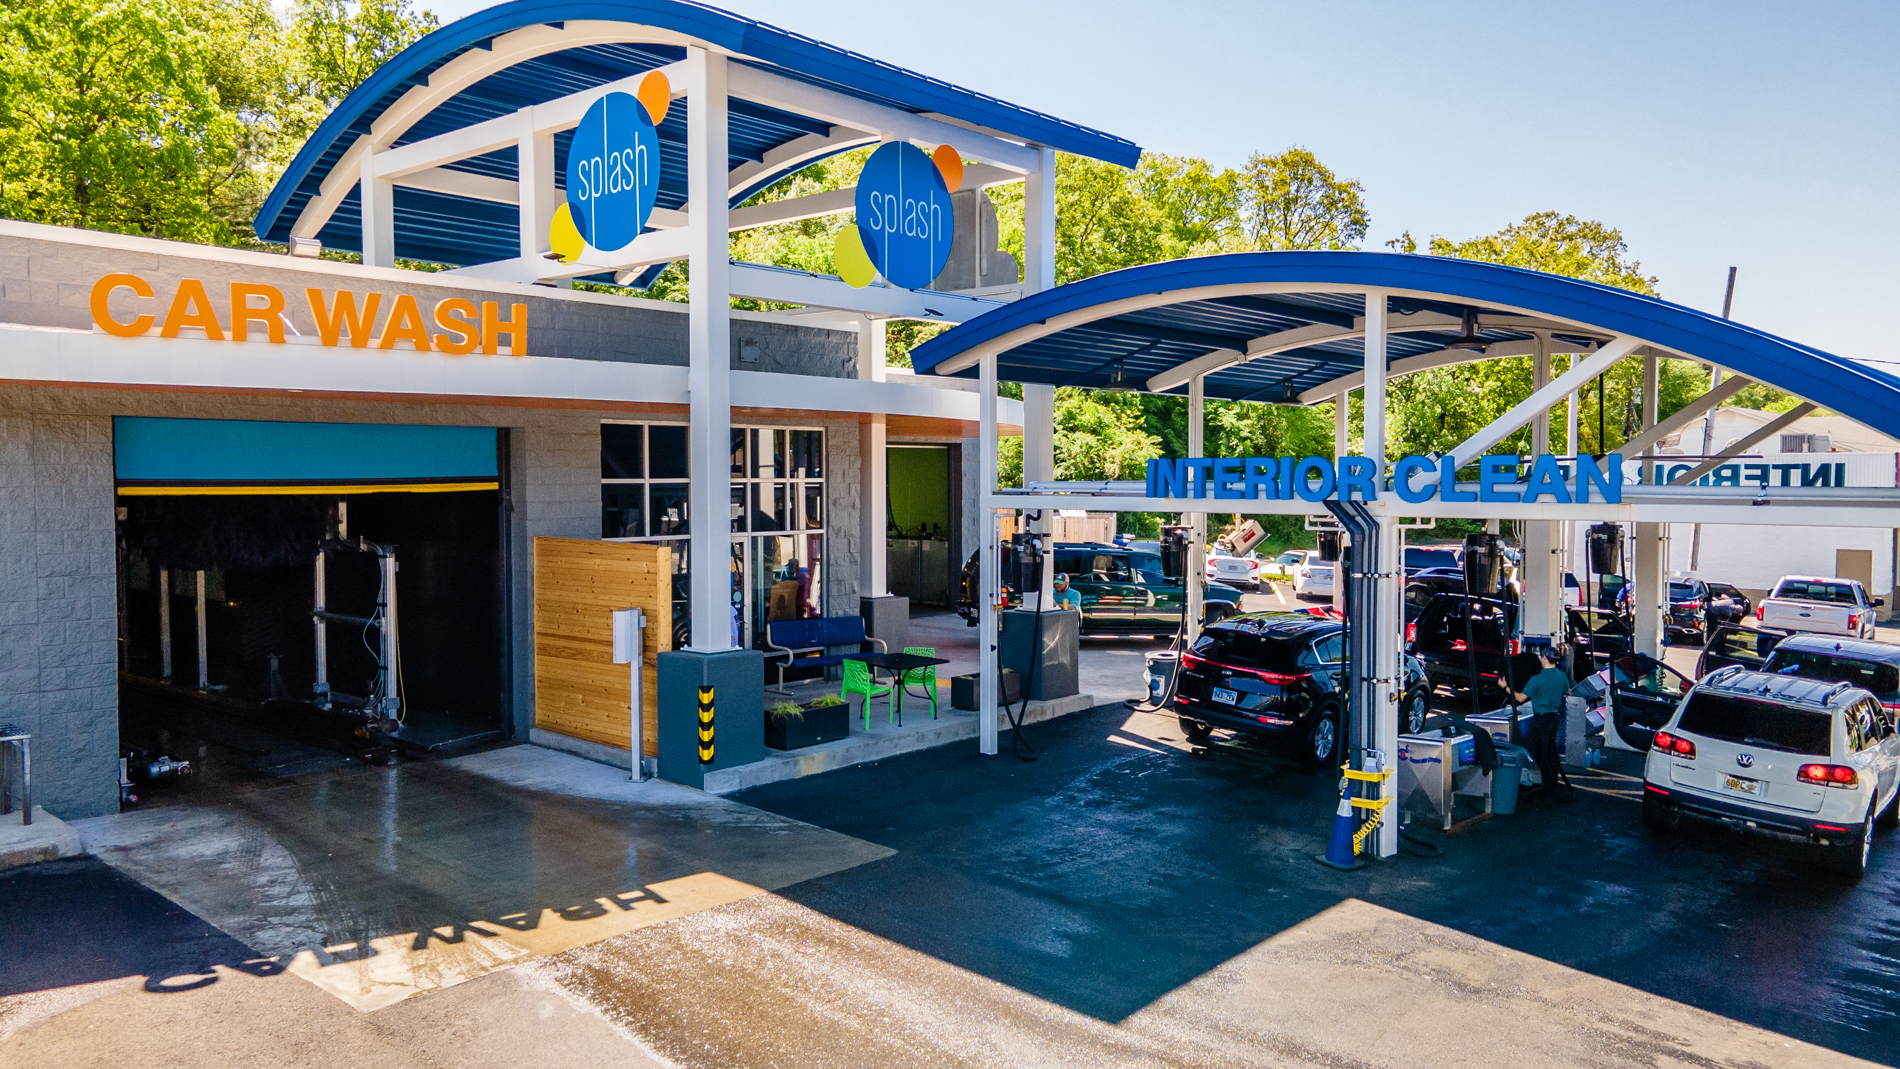 Exterior of Splash Car Wash building with "CAR WASH" and "INTERIOR CLEAN" stations. Cars are in line under the "INTERIOR CLEAN" sign under a blue pavillion.